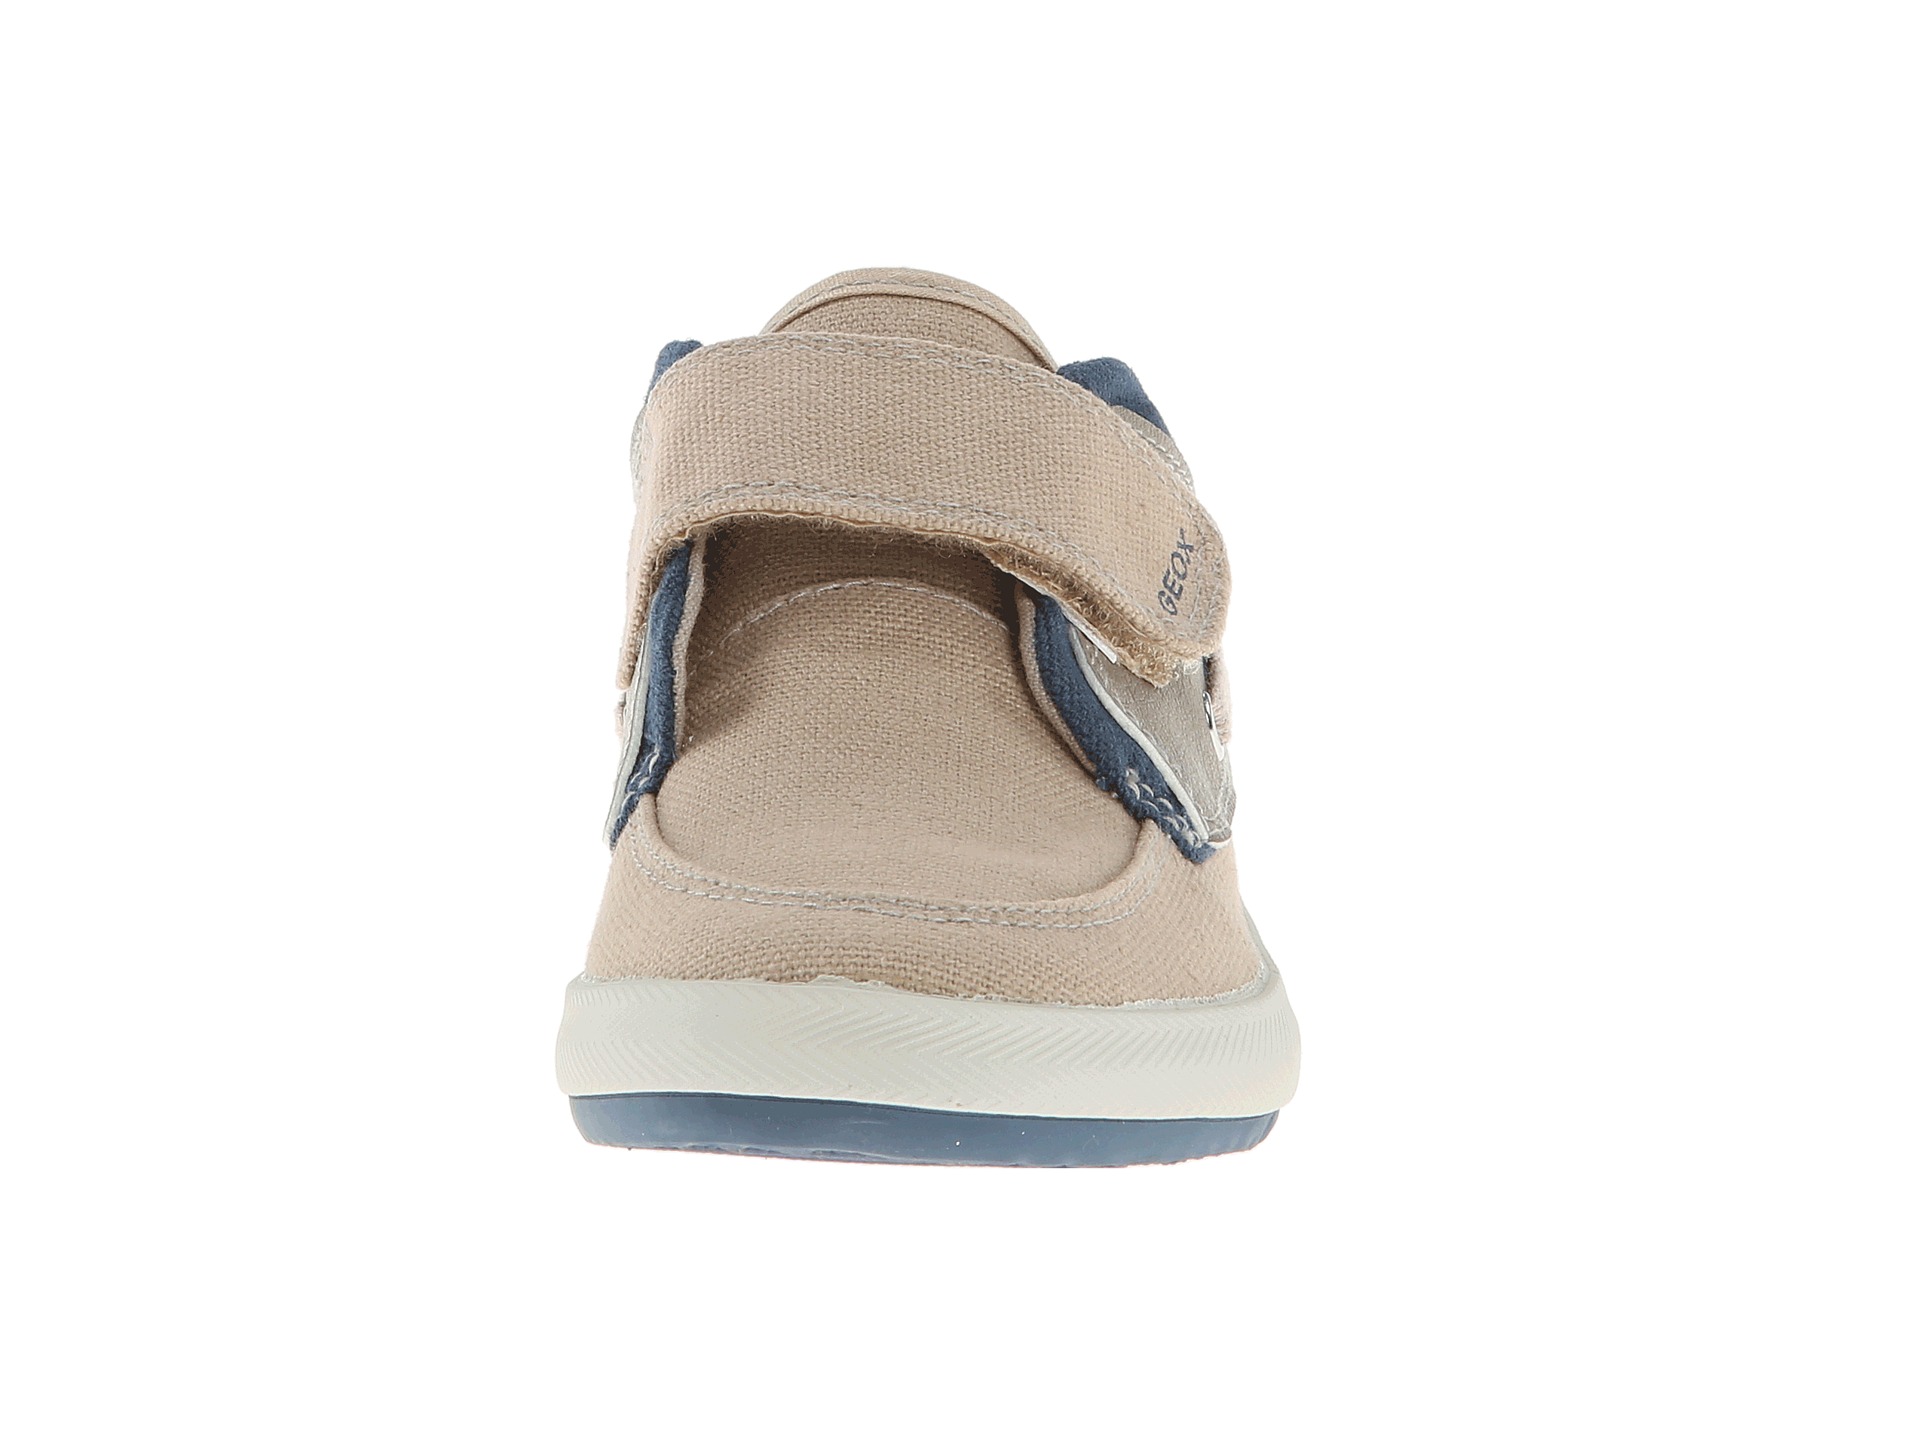 ... Boy Boat Shoe 35 Toddler Little Kid Sand Navy | Shipped Free at Zappos